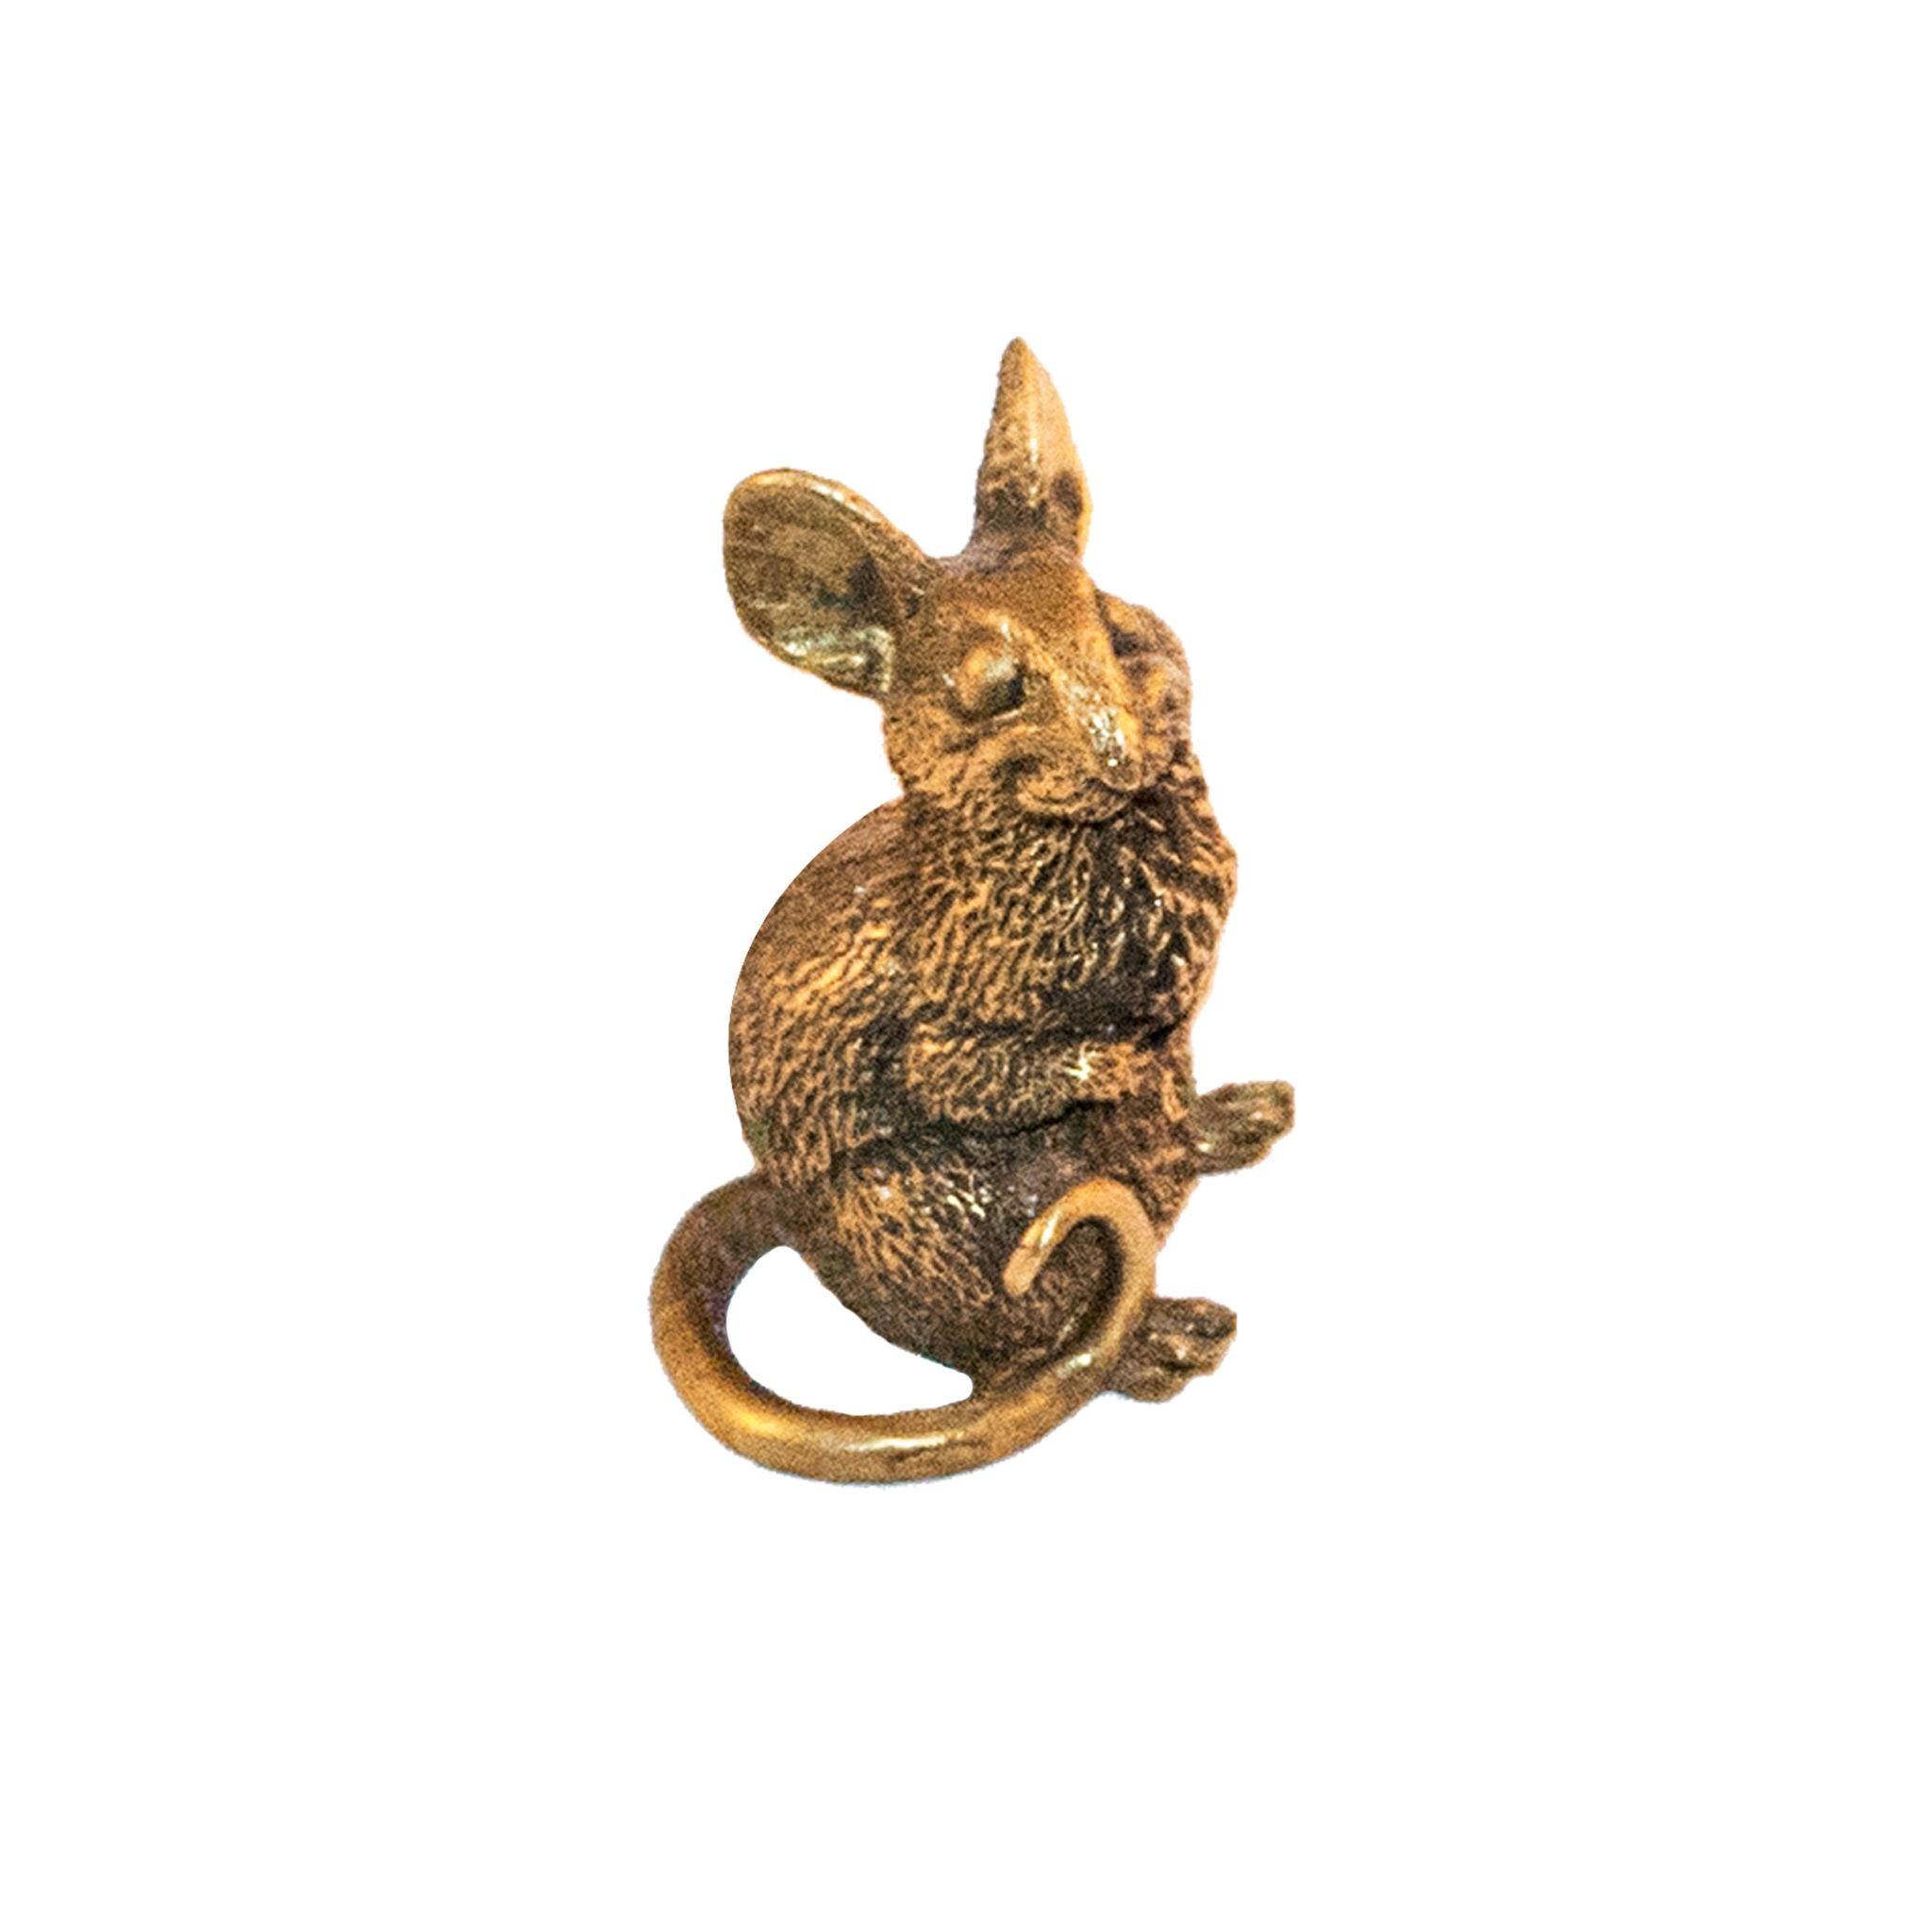 An image of a brass mouse-shaped knob against a neutral background. The knob depicts a charming mouse design, adding a whimsical touch to furniture or drawers.